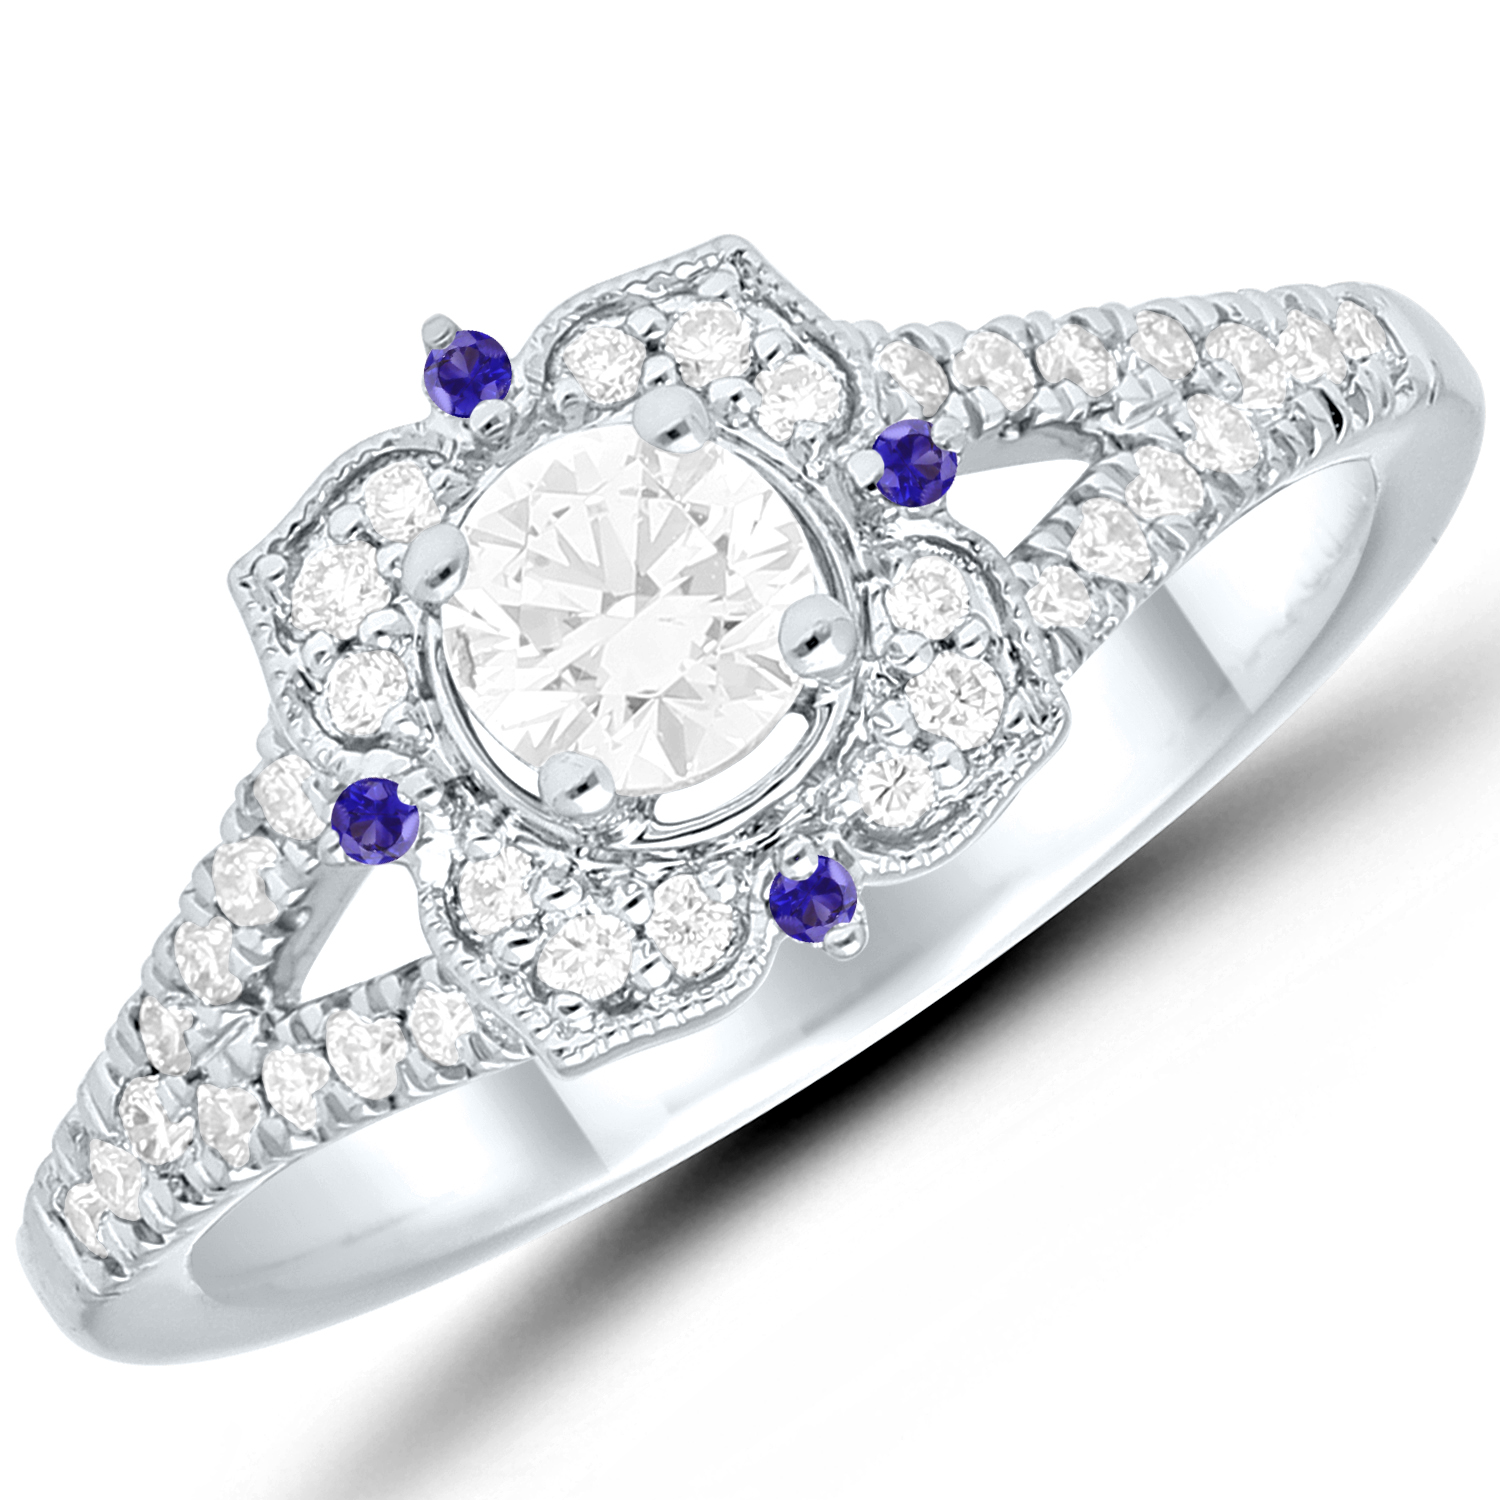 14Kw 5/8Cttw Diamond Engagement Ring With Sapphire Accents 1Rb=.33Ct  H/I I1/I2